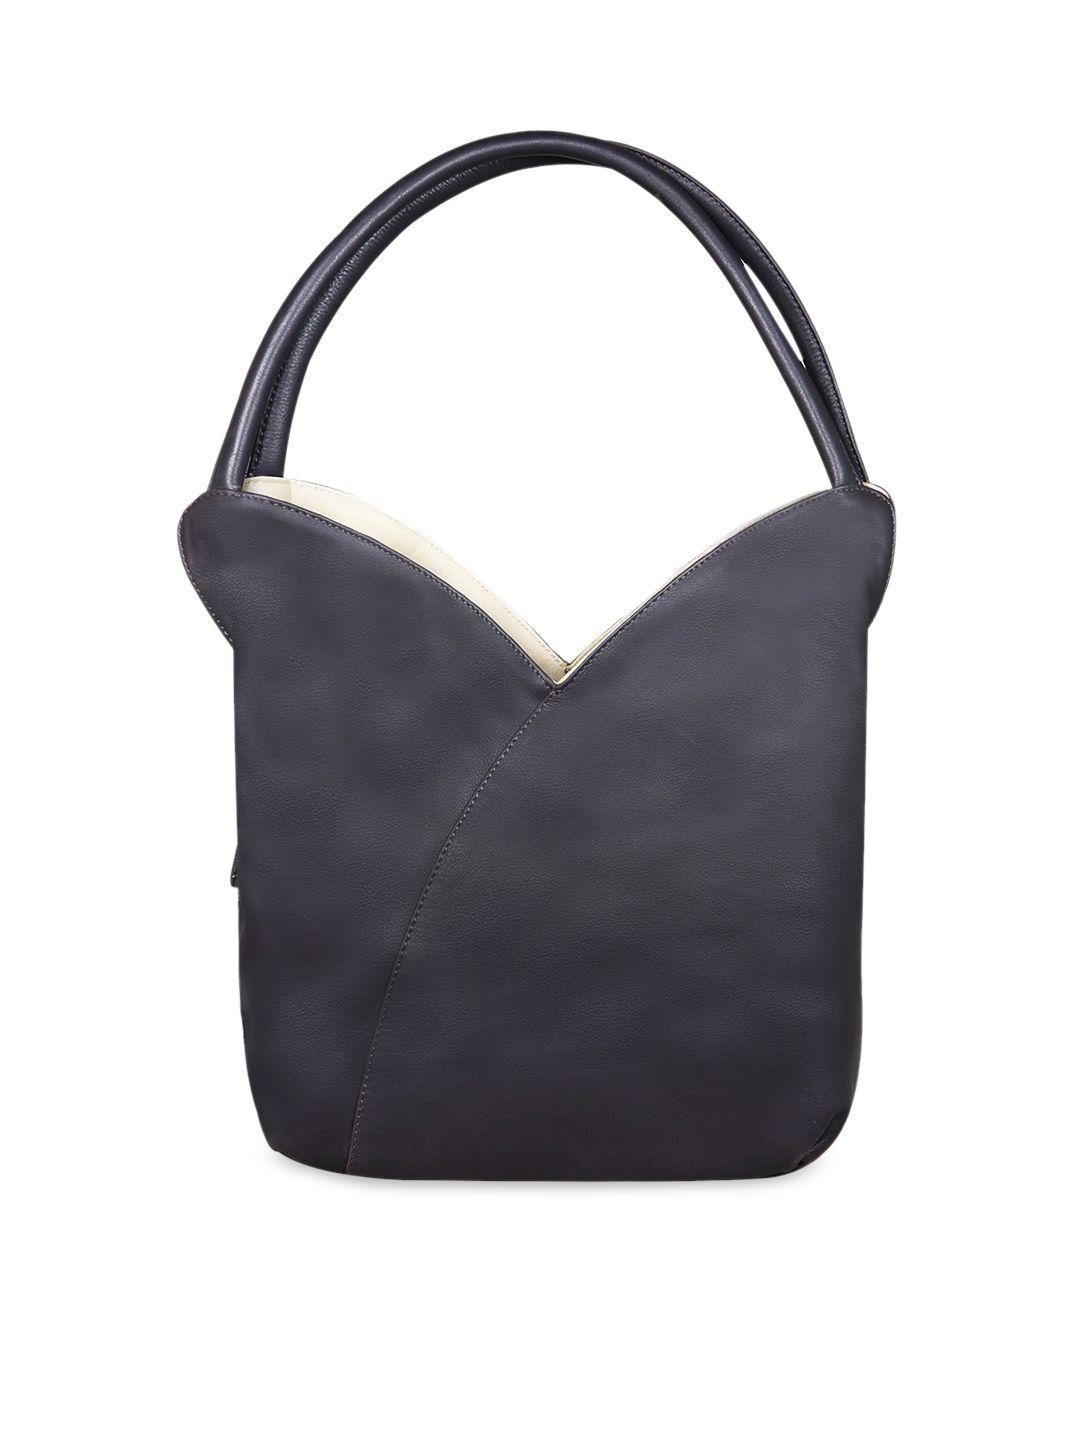 calfnero brown leather structured hobo bag with bow detail